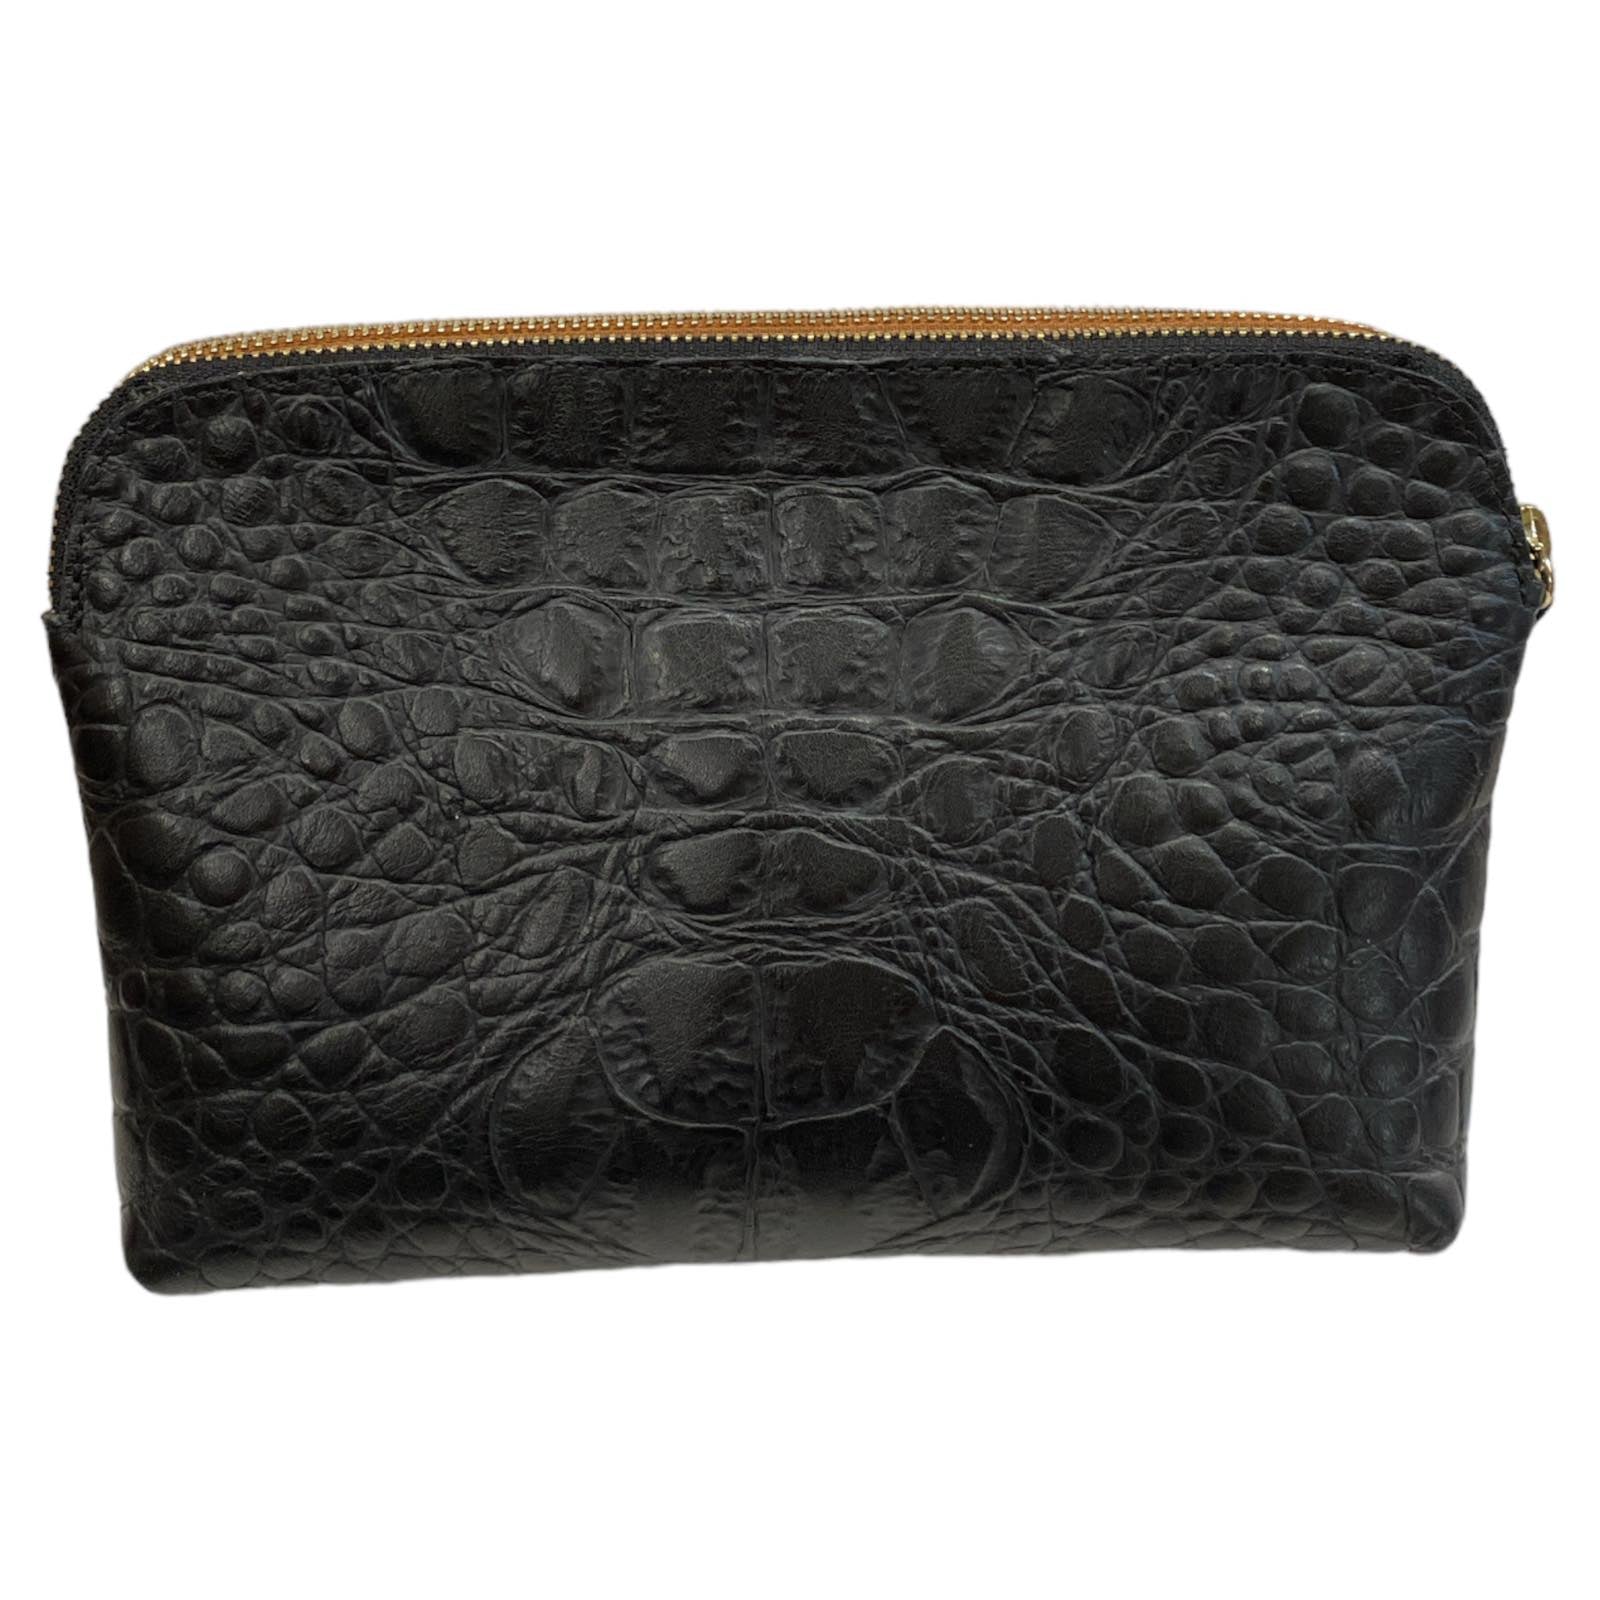 XL taba and black alligator-print leather double box